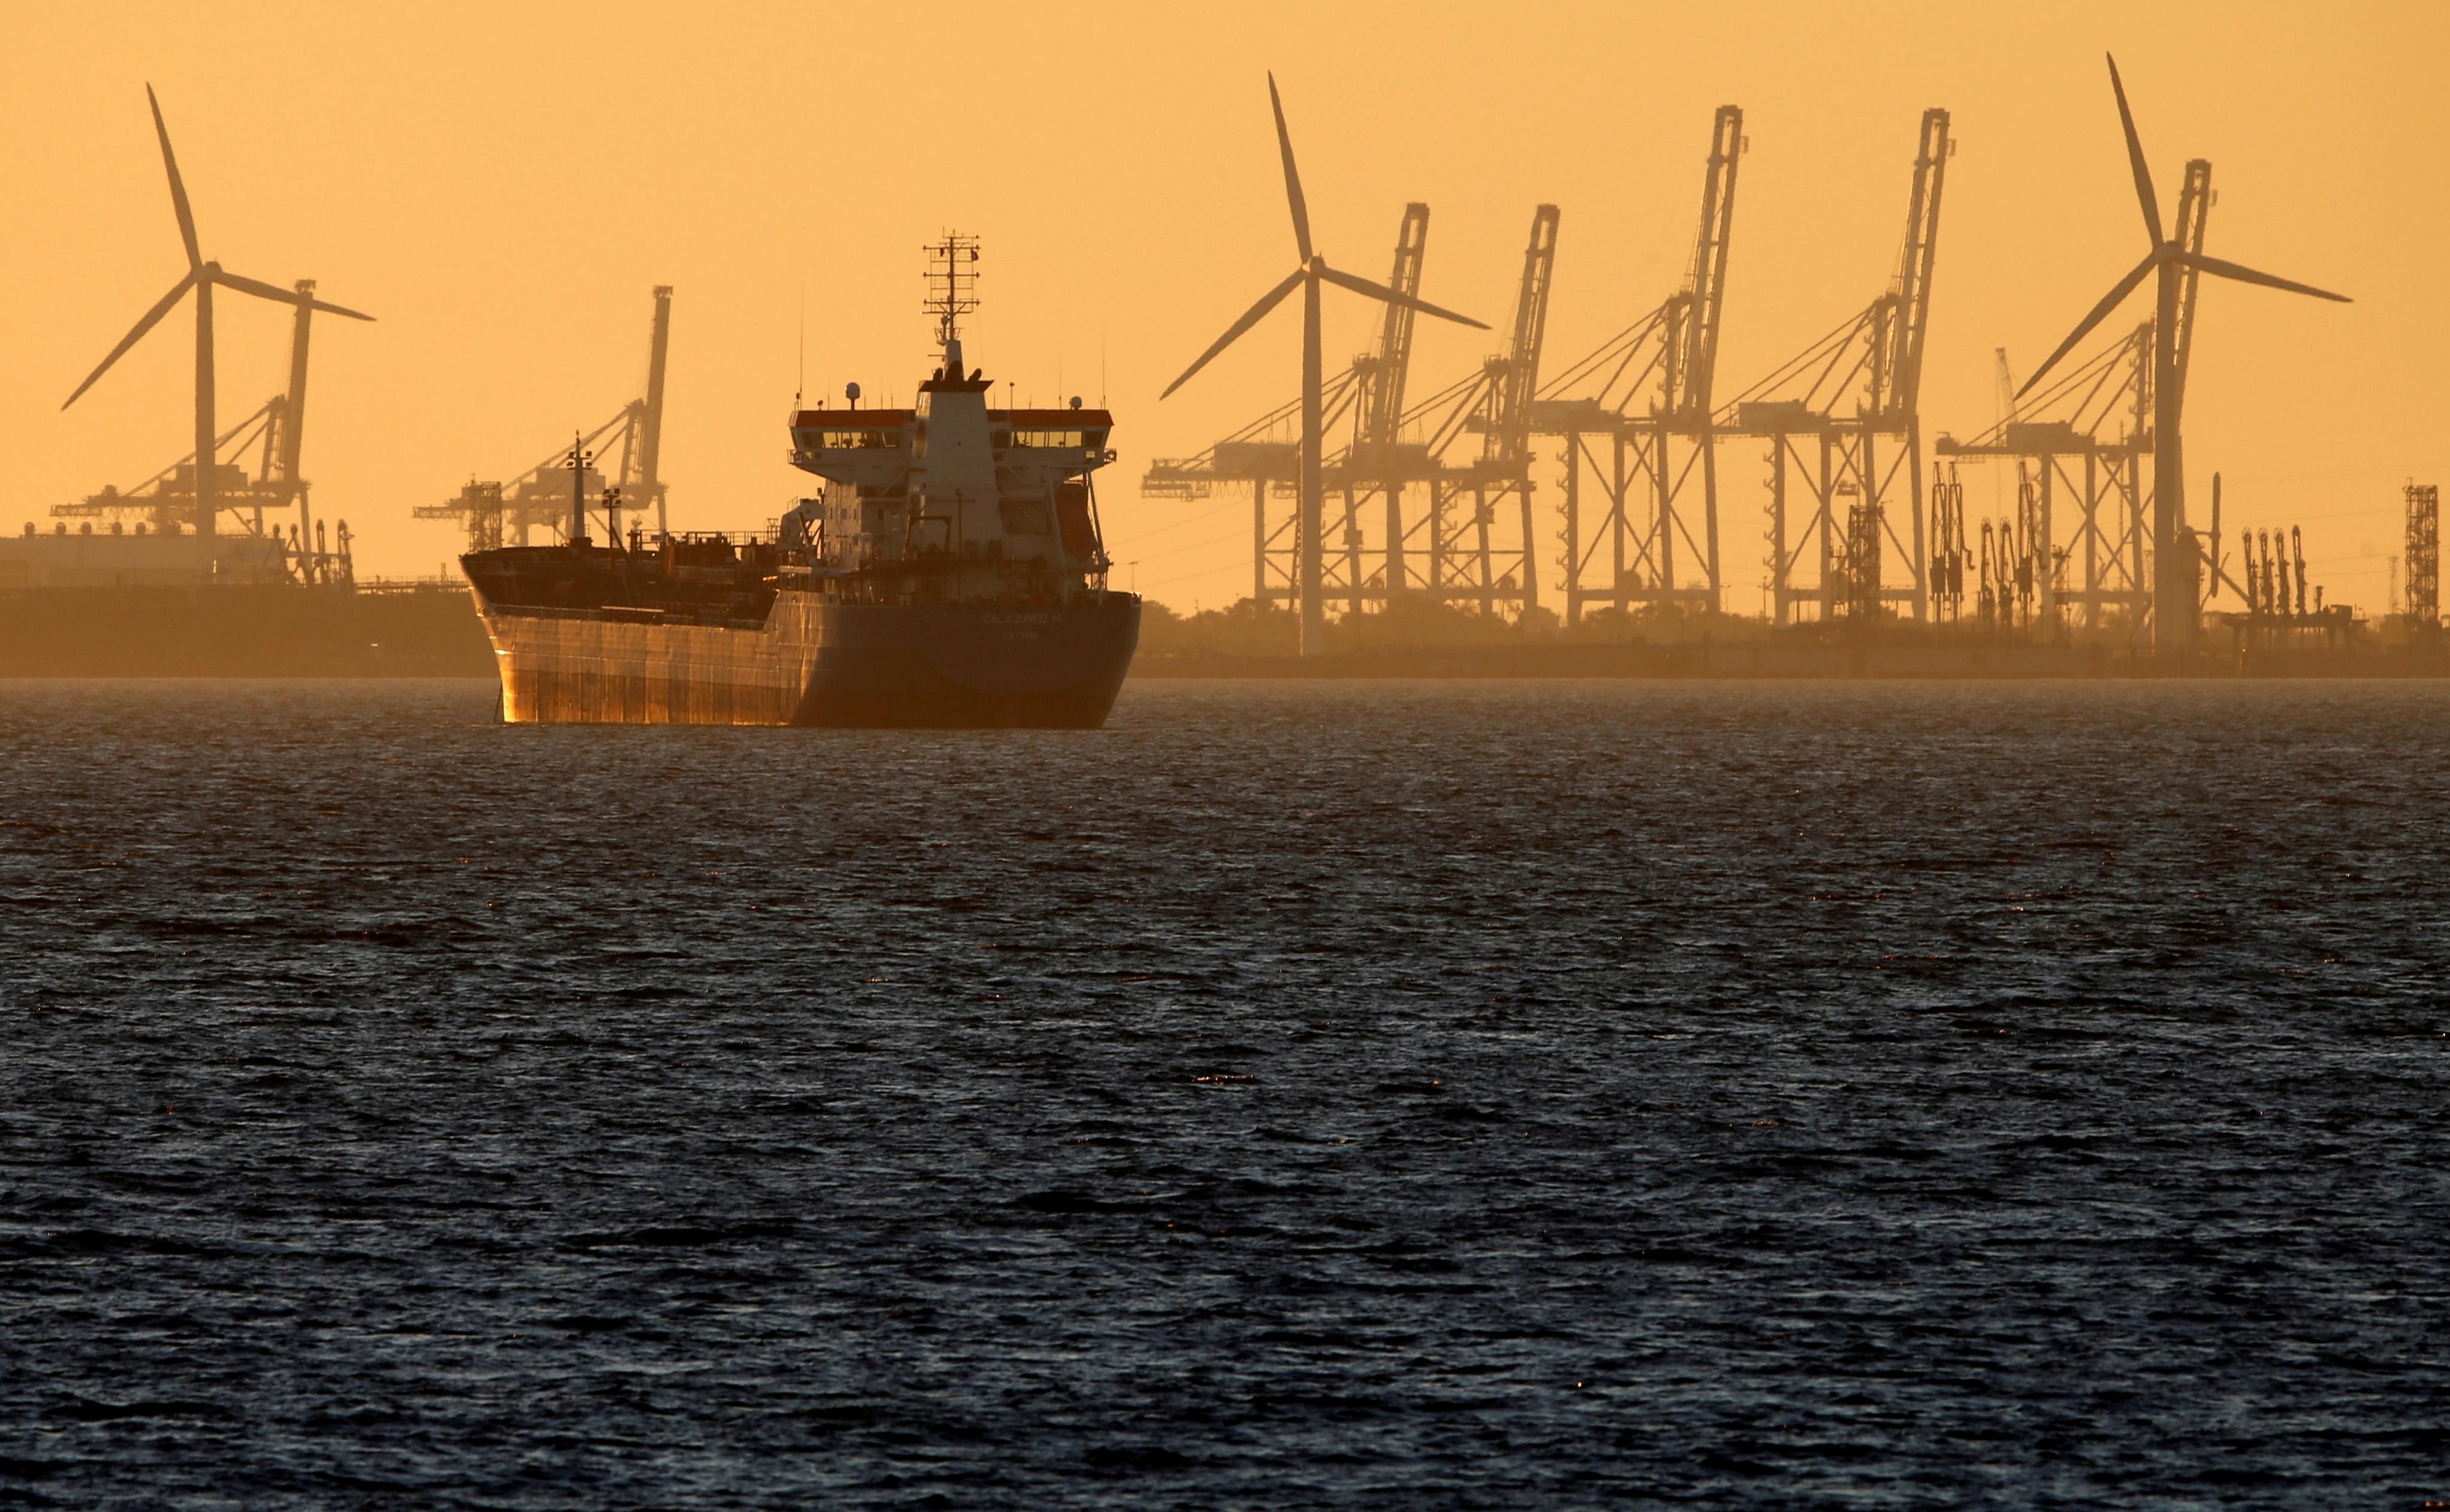 An oil tanker is seen at sunset/ Representative photo. (Credit: Reuters)